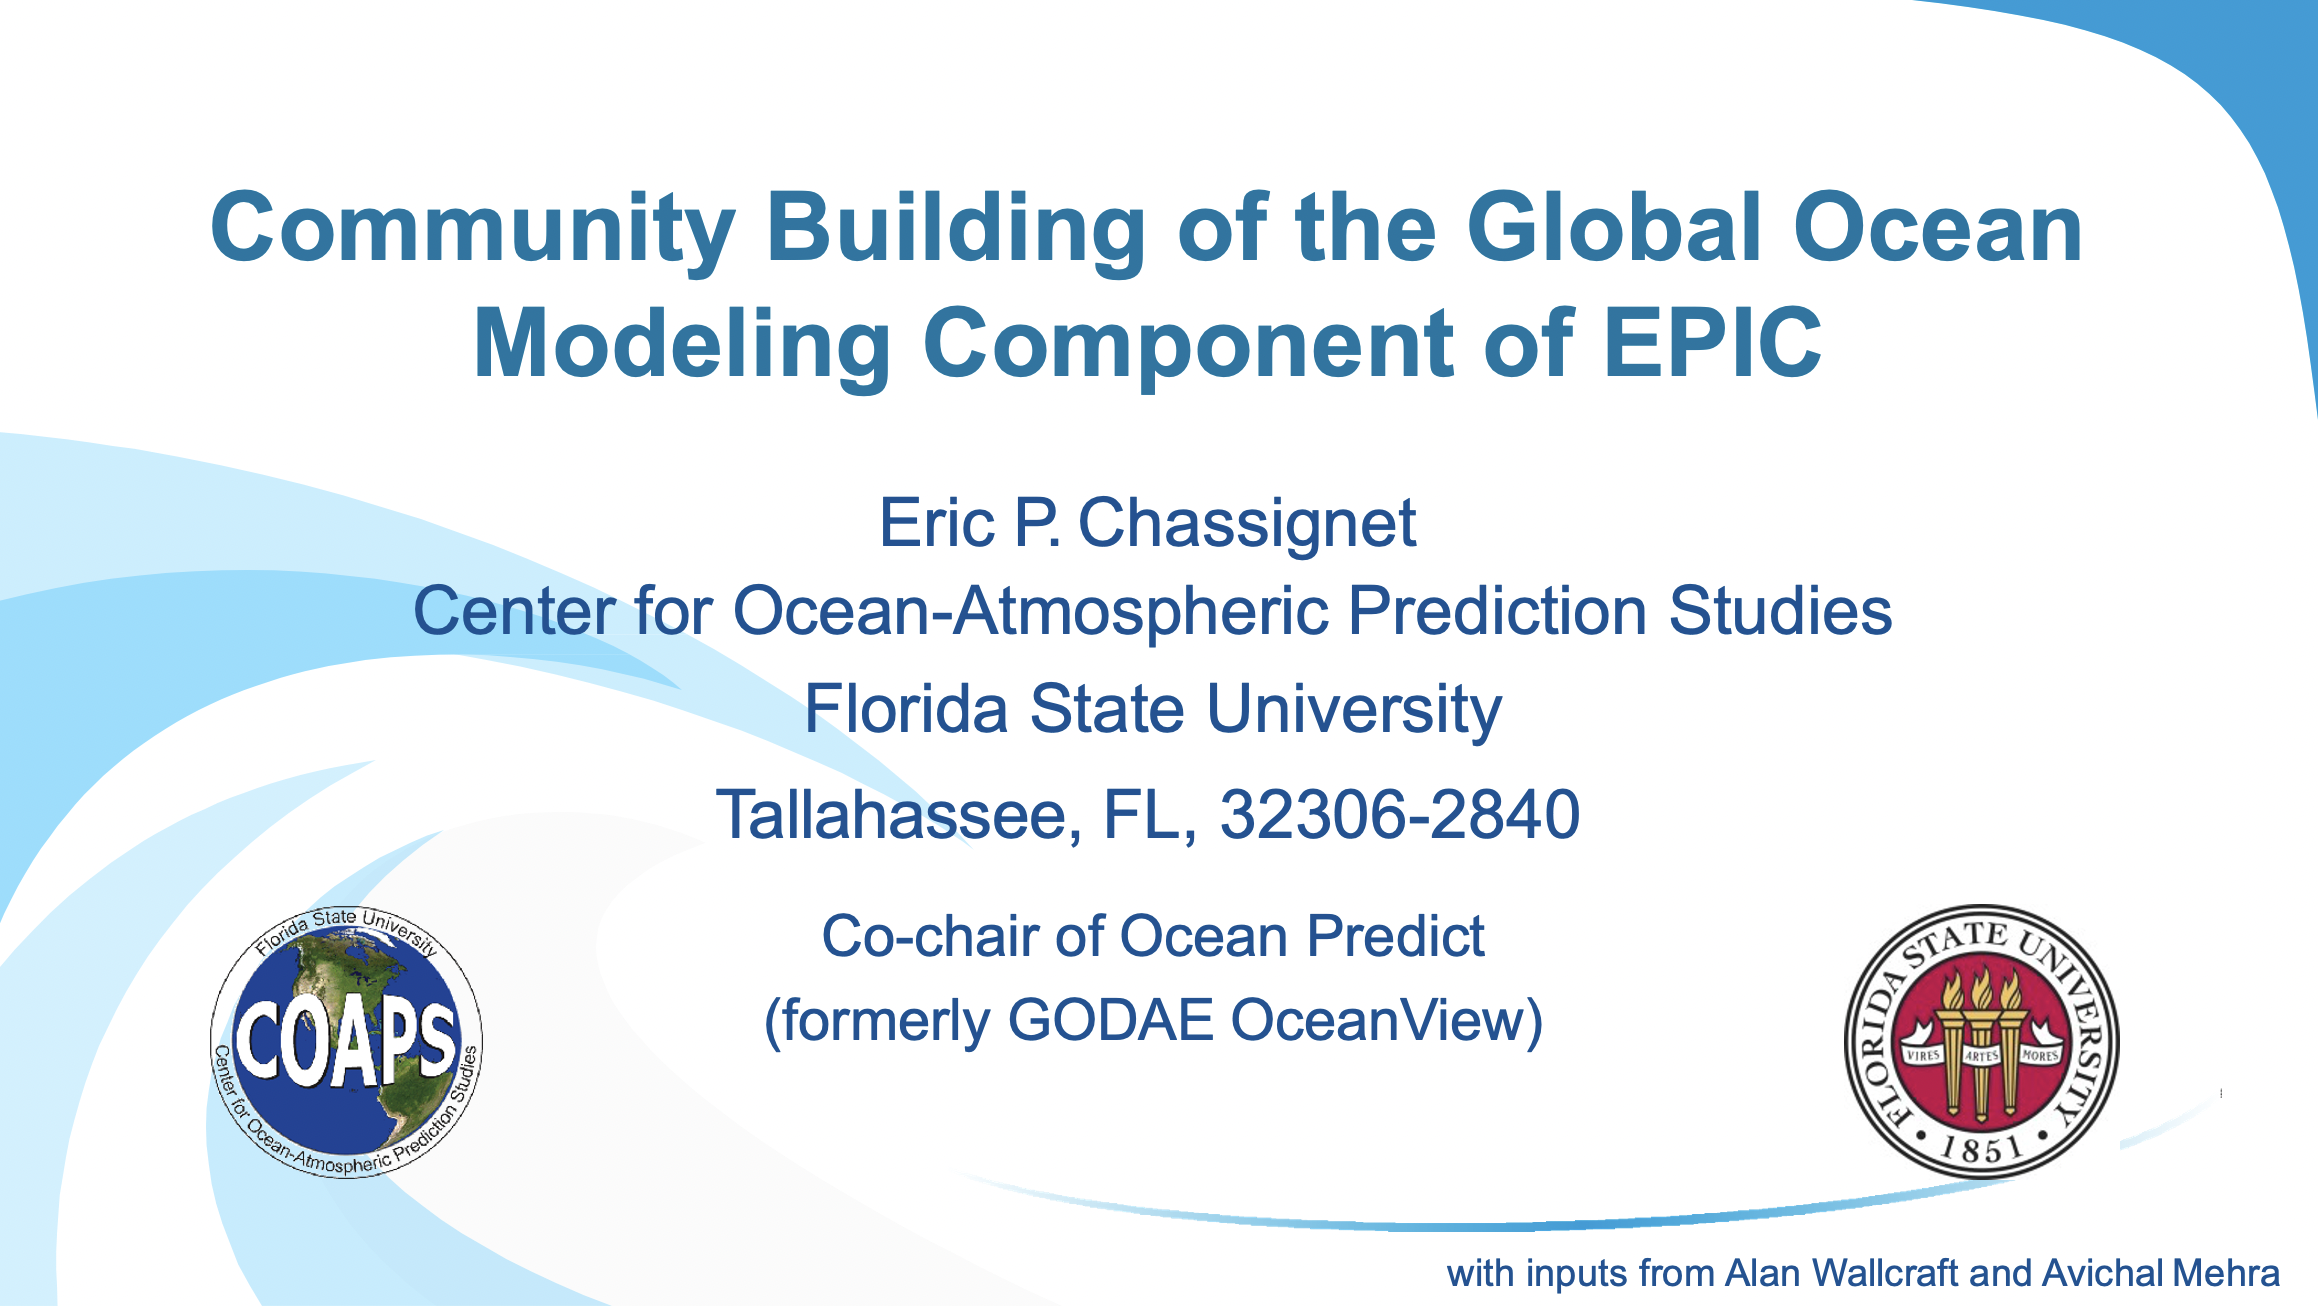 Community Building of the Global Ocean Modeling Component of EPIC